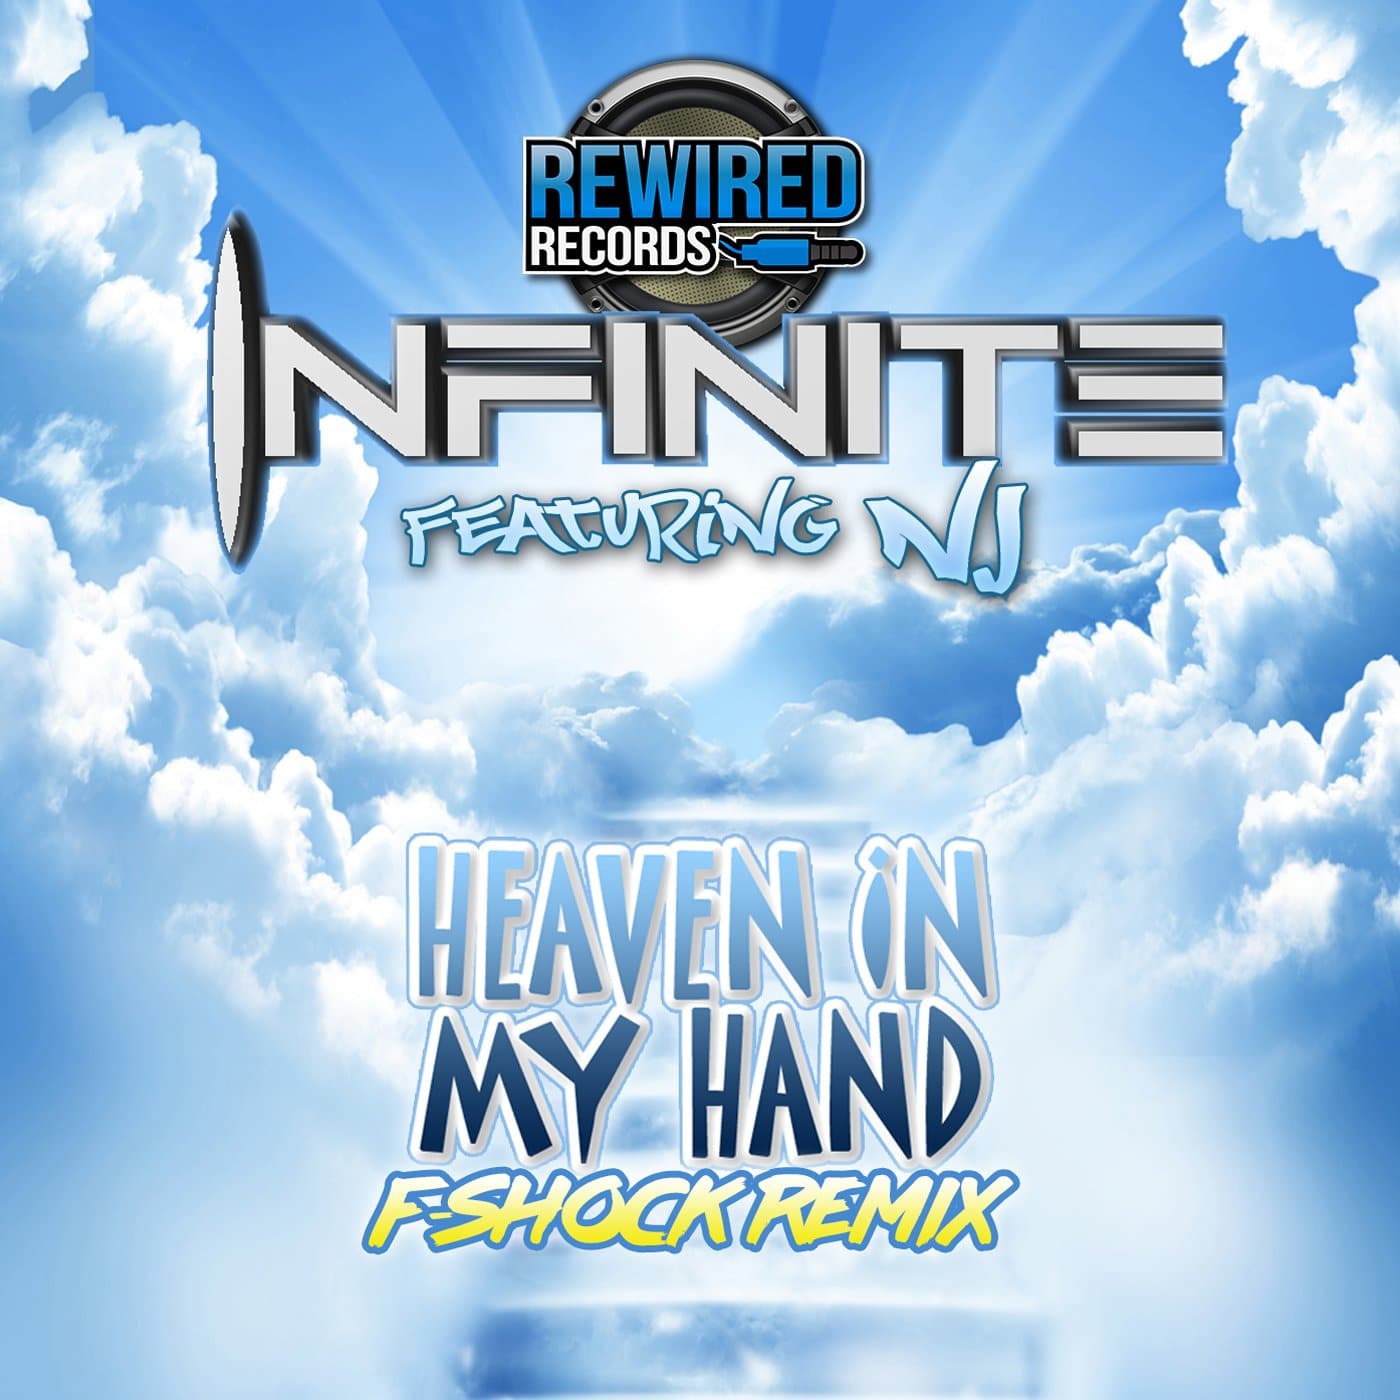 Infinite feat. NJ - Heaven In My Hand (F-Shock Remix) - Rewired Records